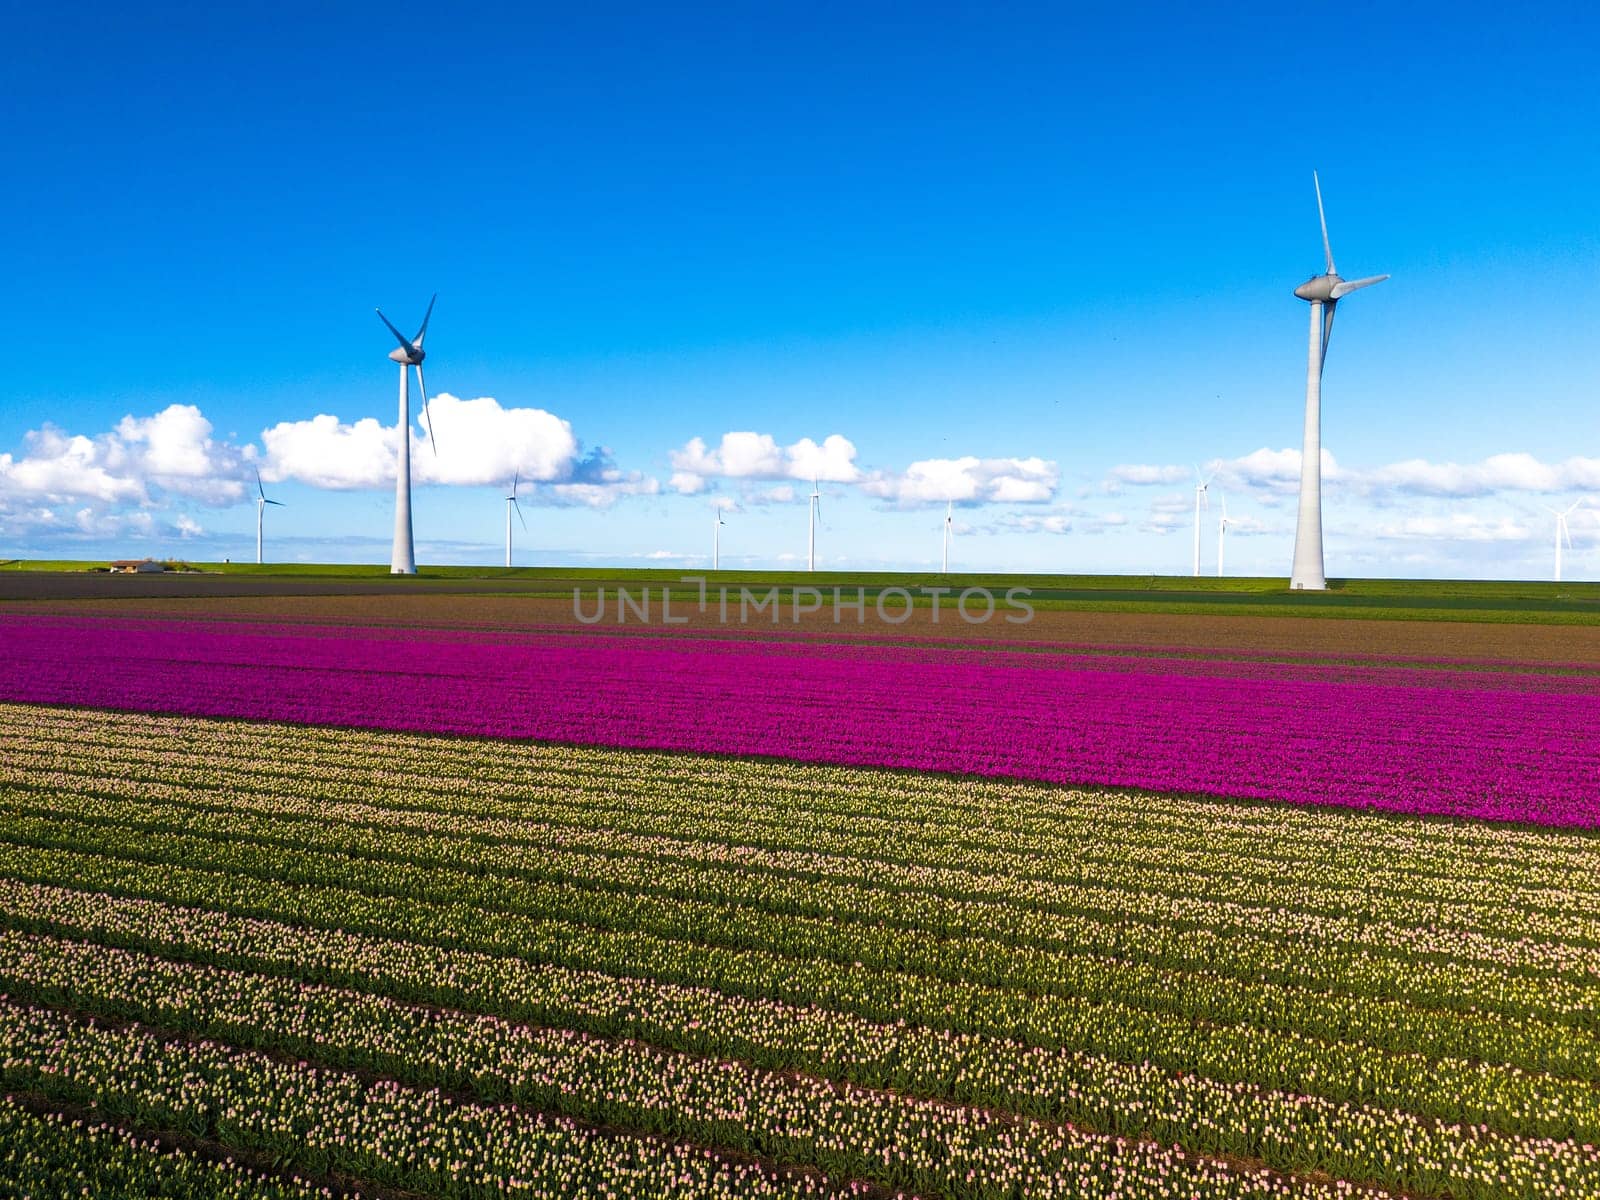 A picturesque scene of a vast field adorned with colorful flowers, with majestic windmills spinning in the distance, set against a clear blue sky by fokkebok